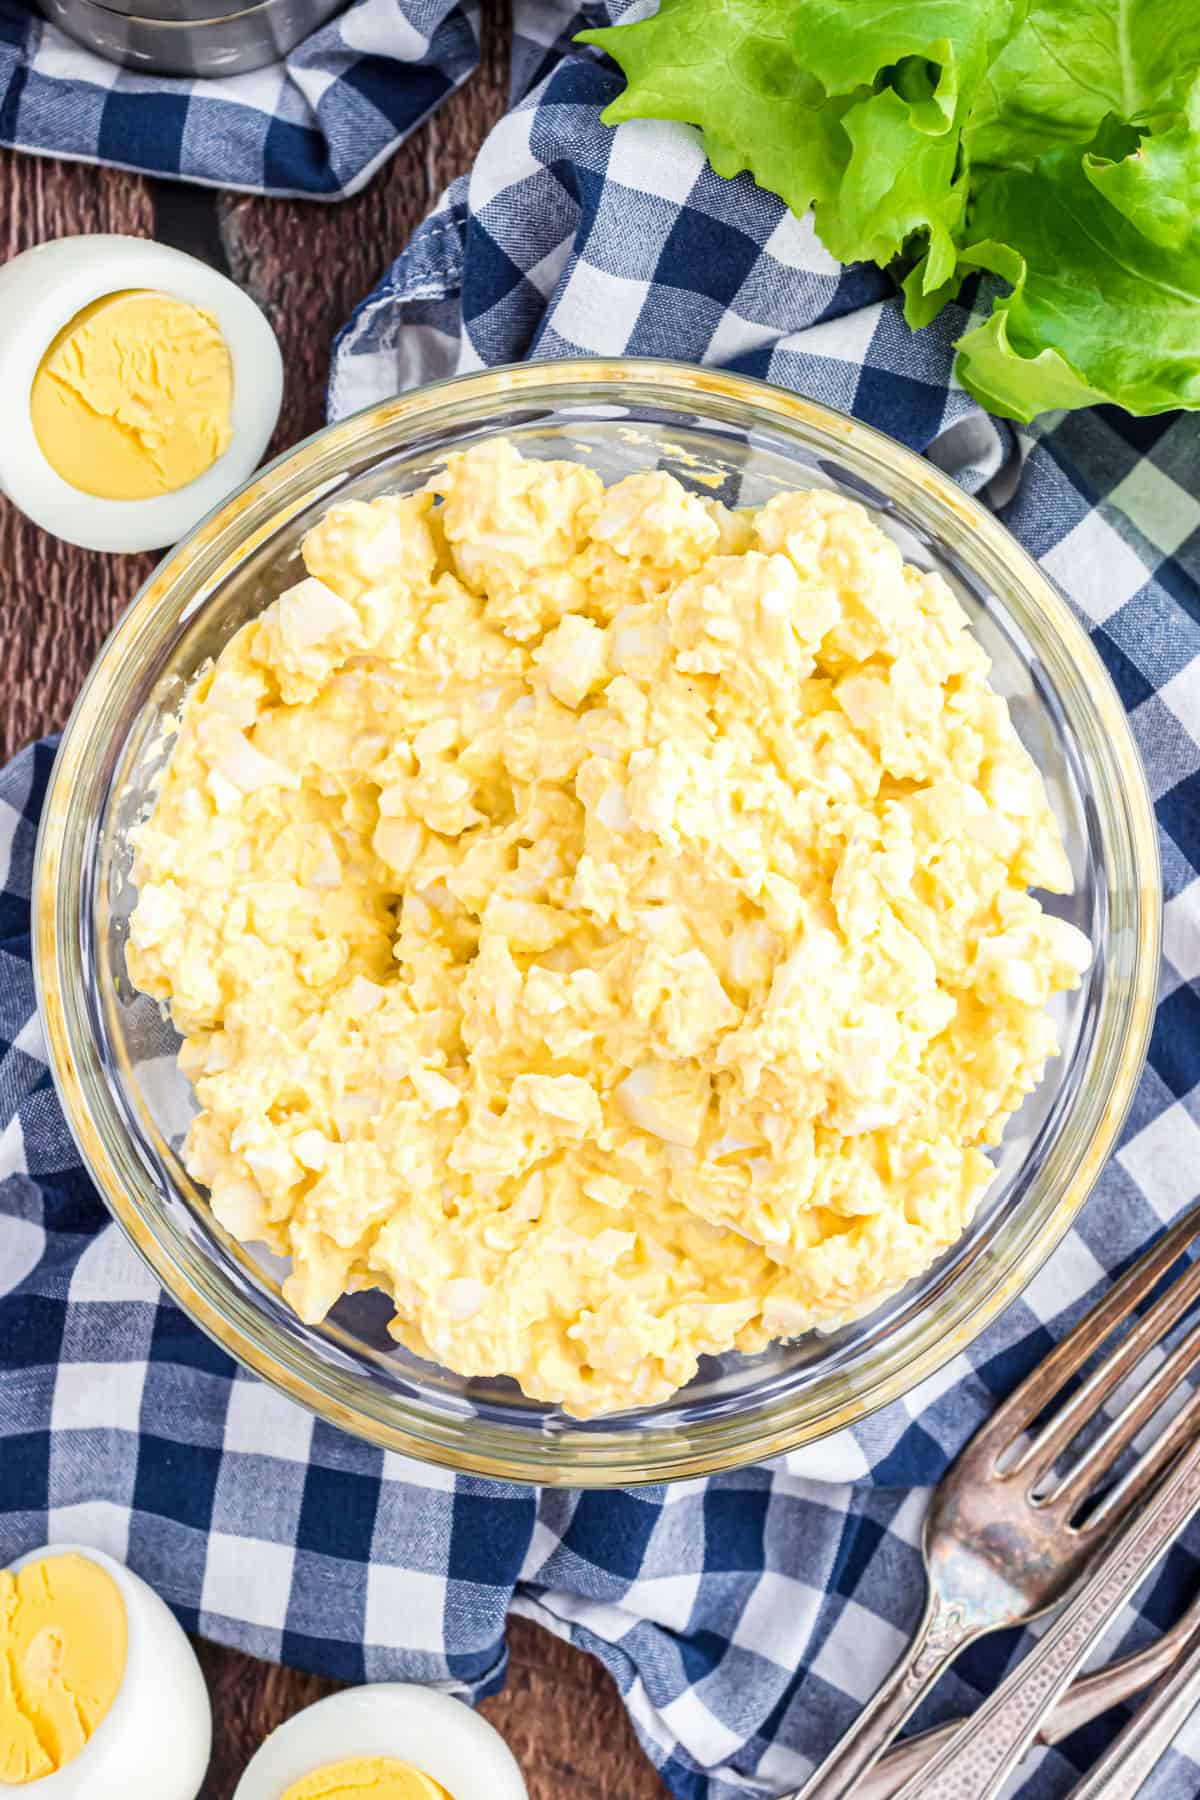 Egg salad in a clear glass bowl for serving.